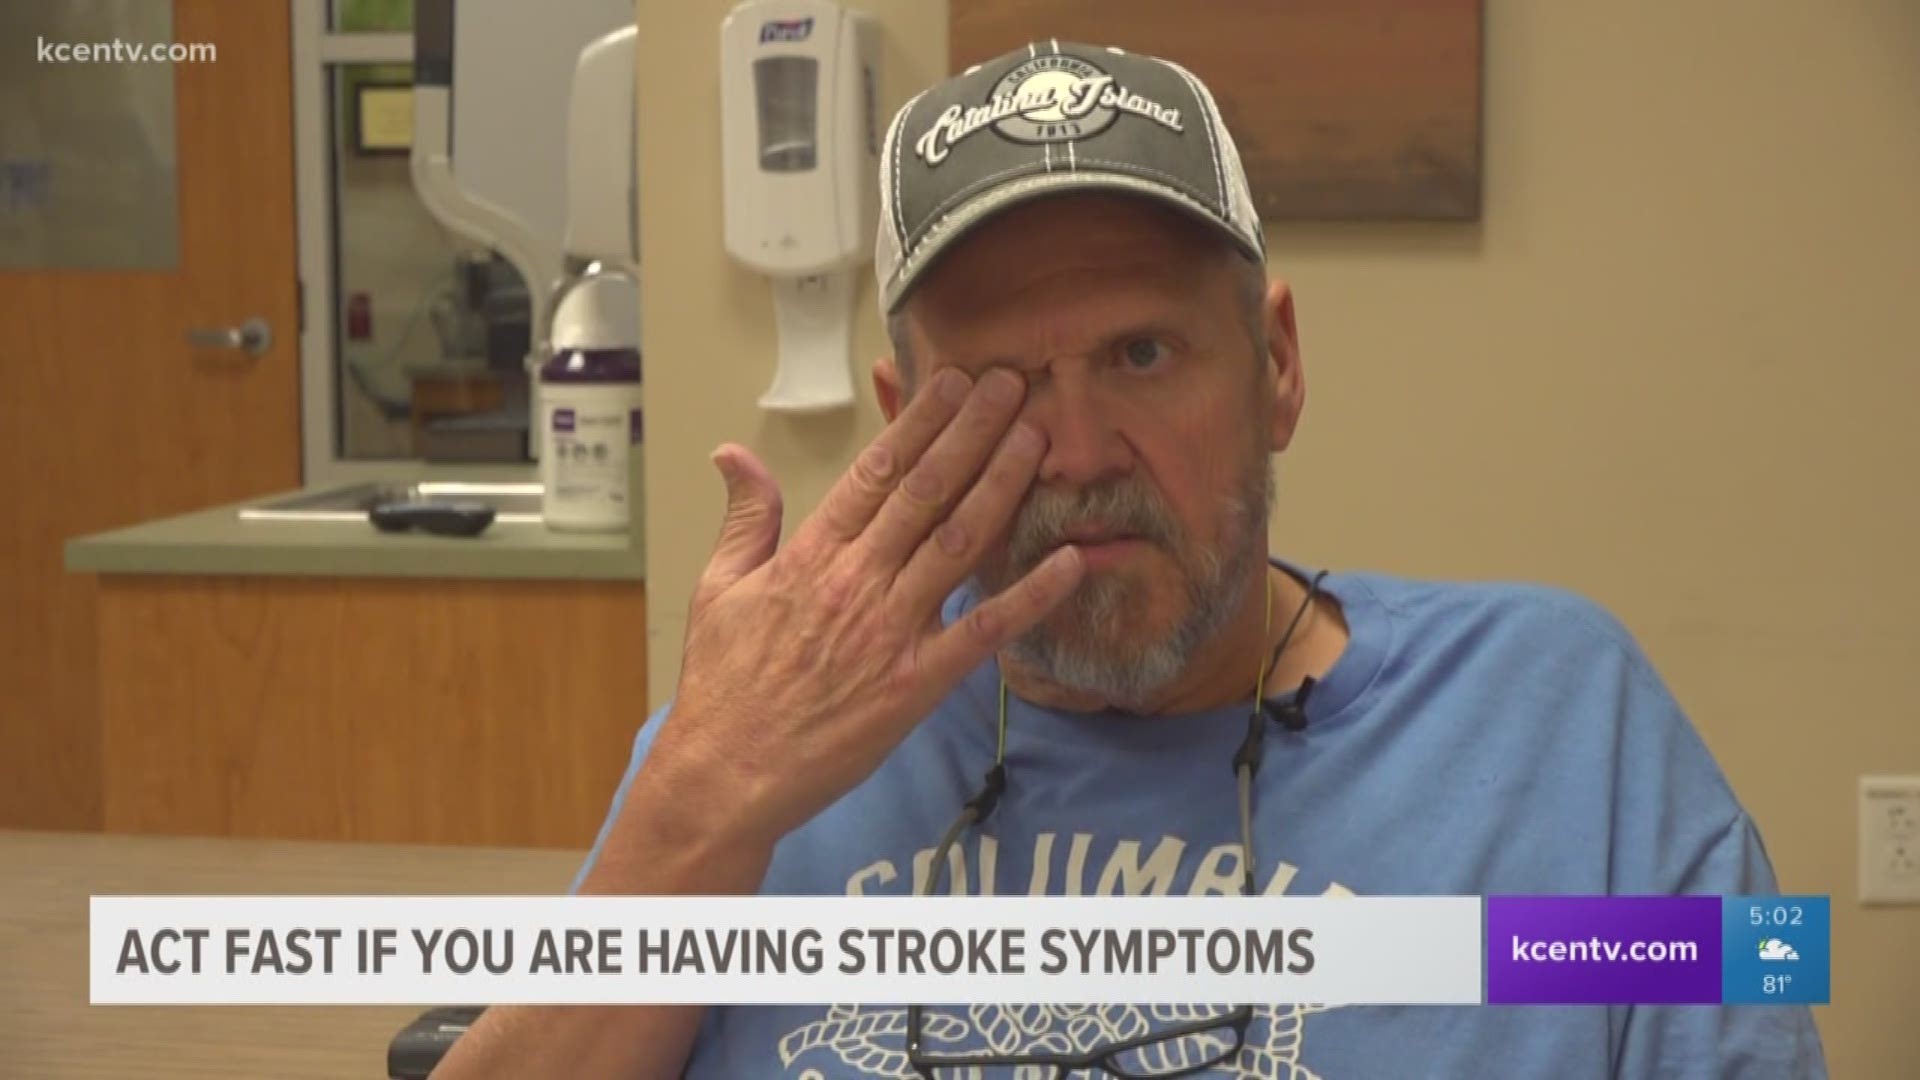 During Stroke Awareness Months, doctors at Baylor Scott and White are telling Central Texans to act fast if they think they are experiencing stroke symptoms.